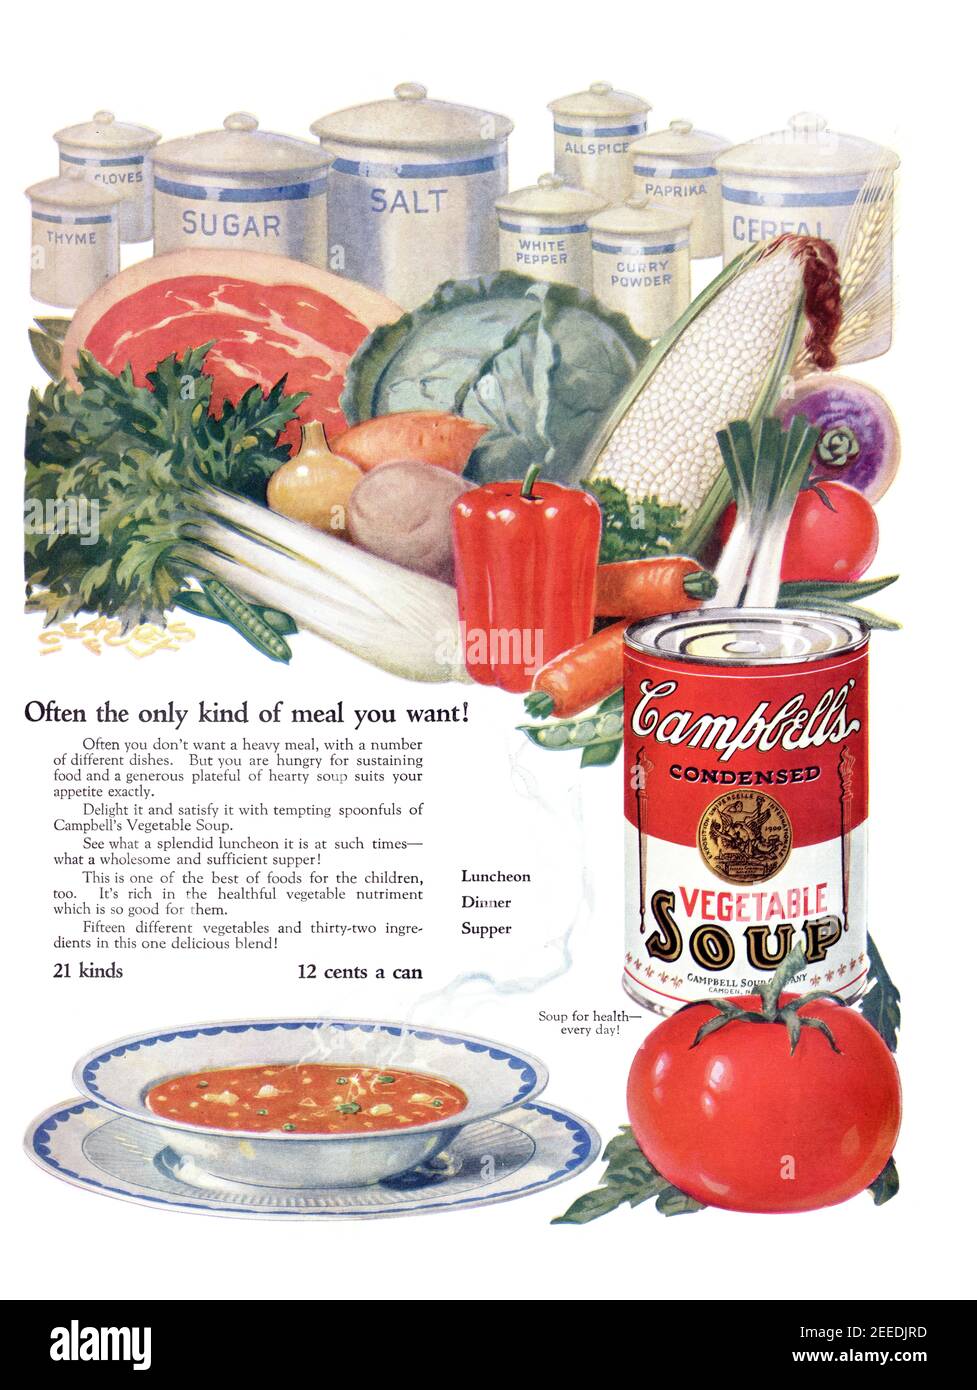 1925 Campbell Soup 'Often the only kind of meal you want!' Advertisement, retouched and revived, cleaned, poster quality, 600dpi Stock Photo